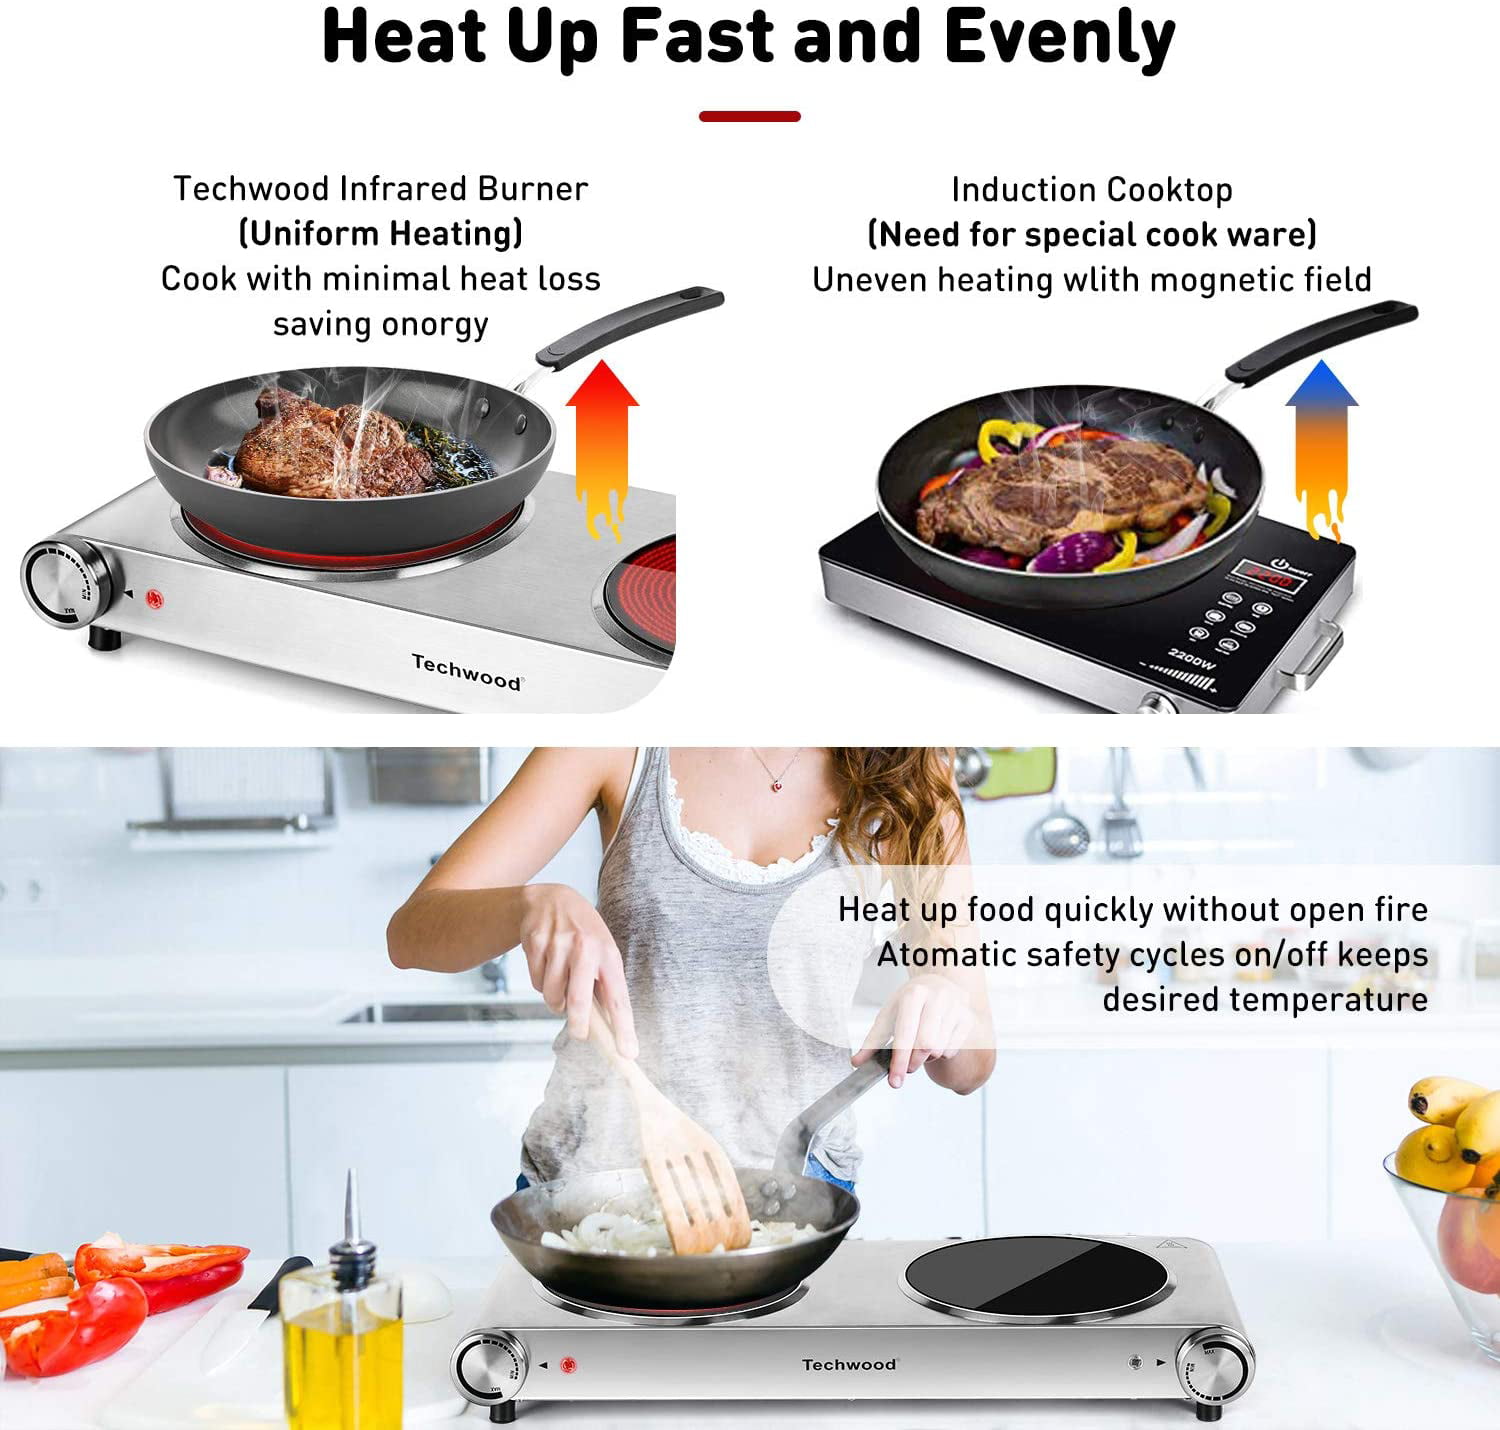 Techwood Electric Stove, Double Infrared Ceramic Hot Plate for Cooking, Two Control Cooktop Burner, Portable Anti-scald